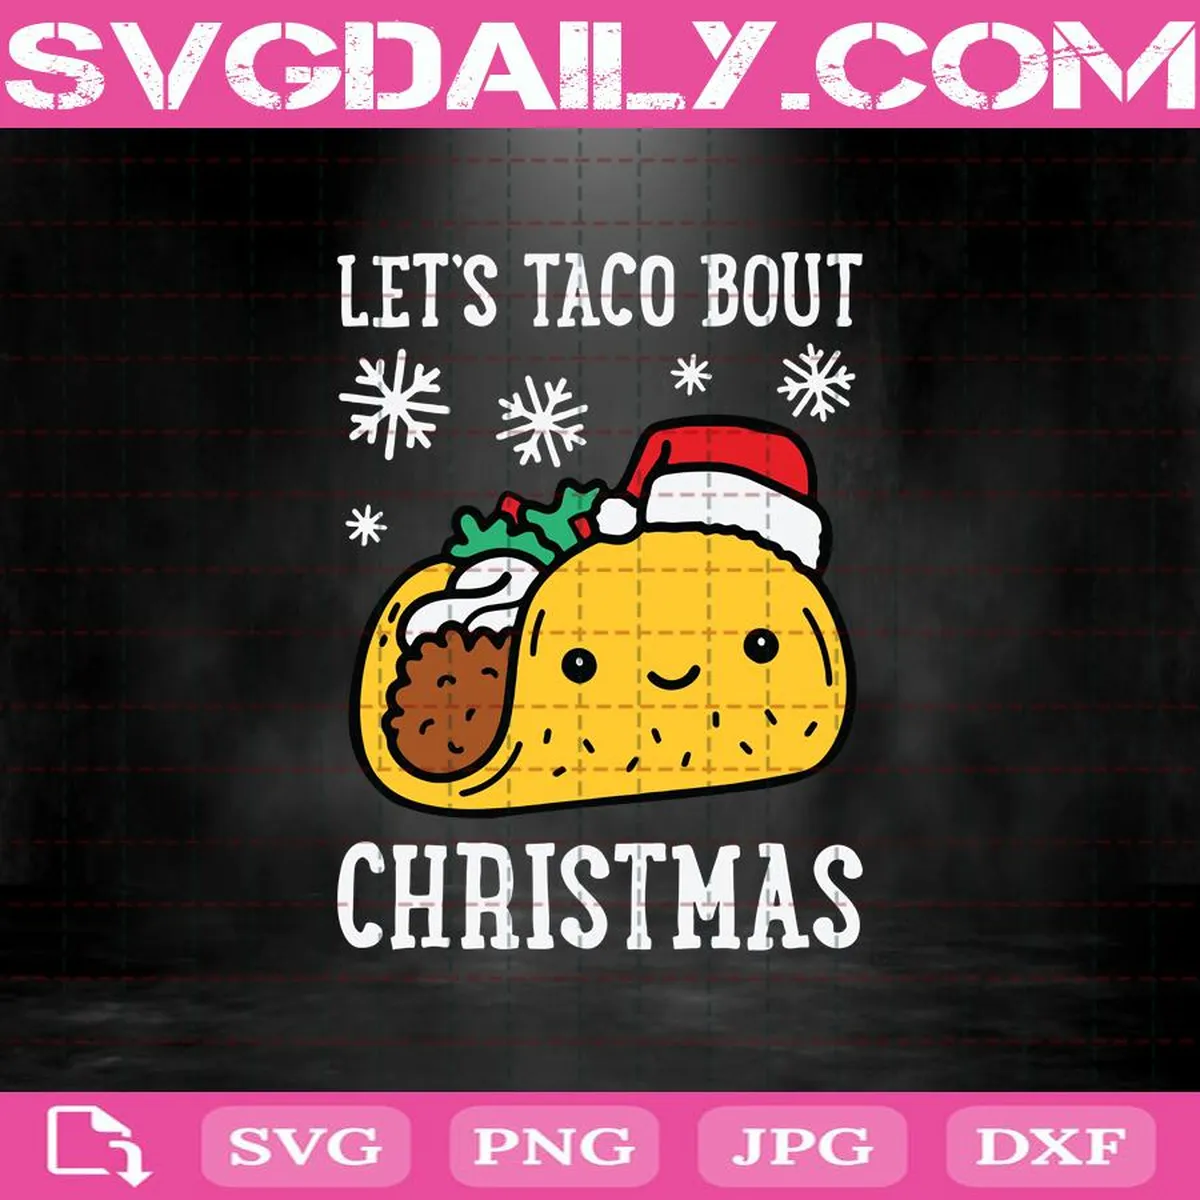 Let’s Tago Bout Christmas Svg, Let’s Taco Bout Svg, Santa Tacos Svg, Merry Christmas Svg, Taco For Christmas Svg, Cute Taco Svg, Christmas Taco Svg